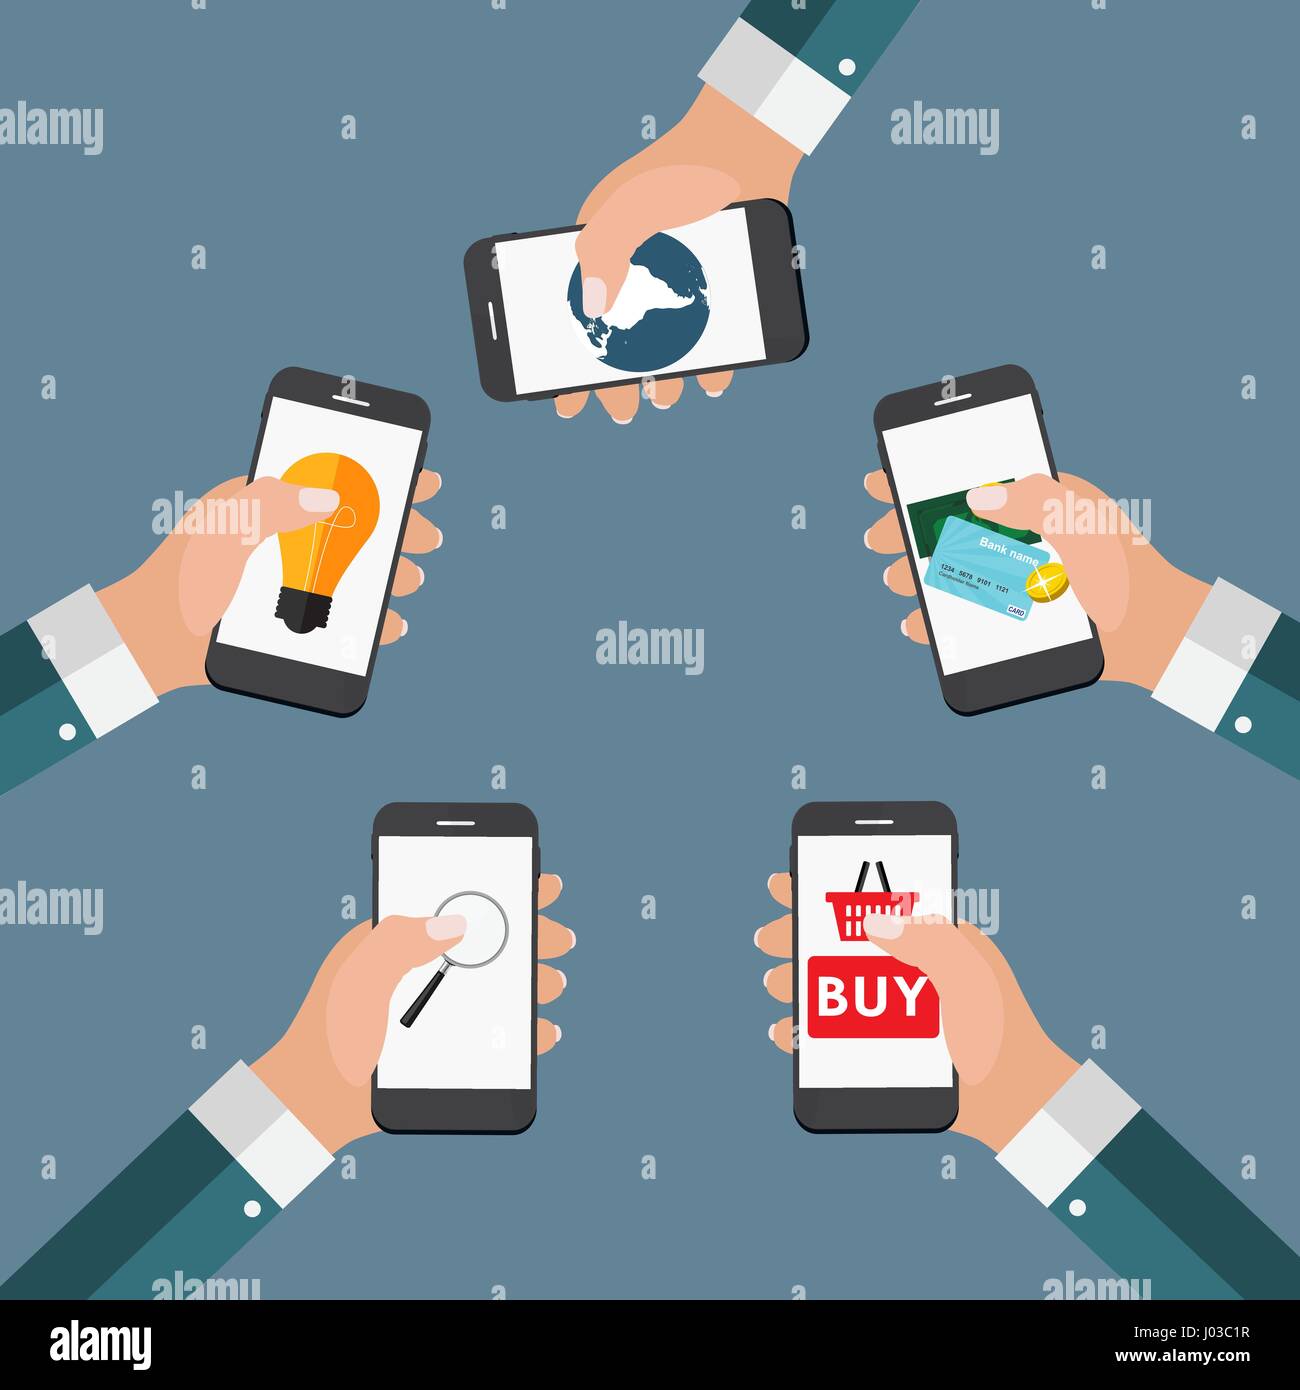 Mobile Apps Concept Online Business, Shopping, E-Commerce in Mod Stock Vector